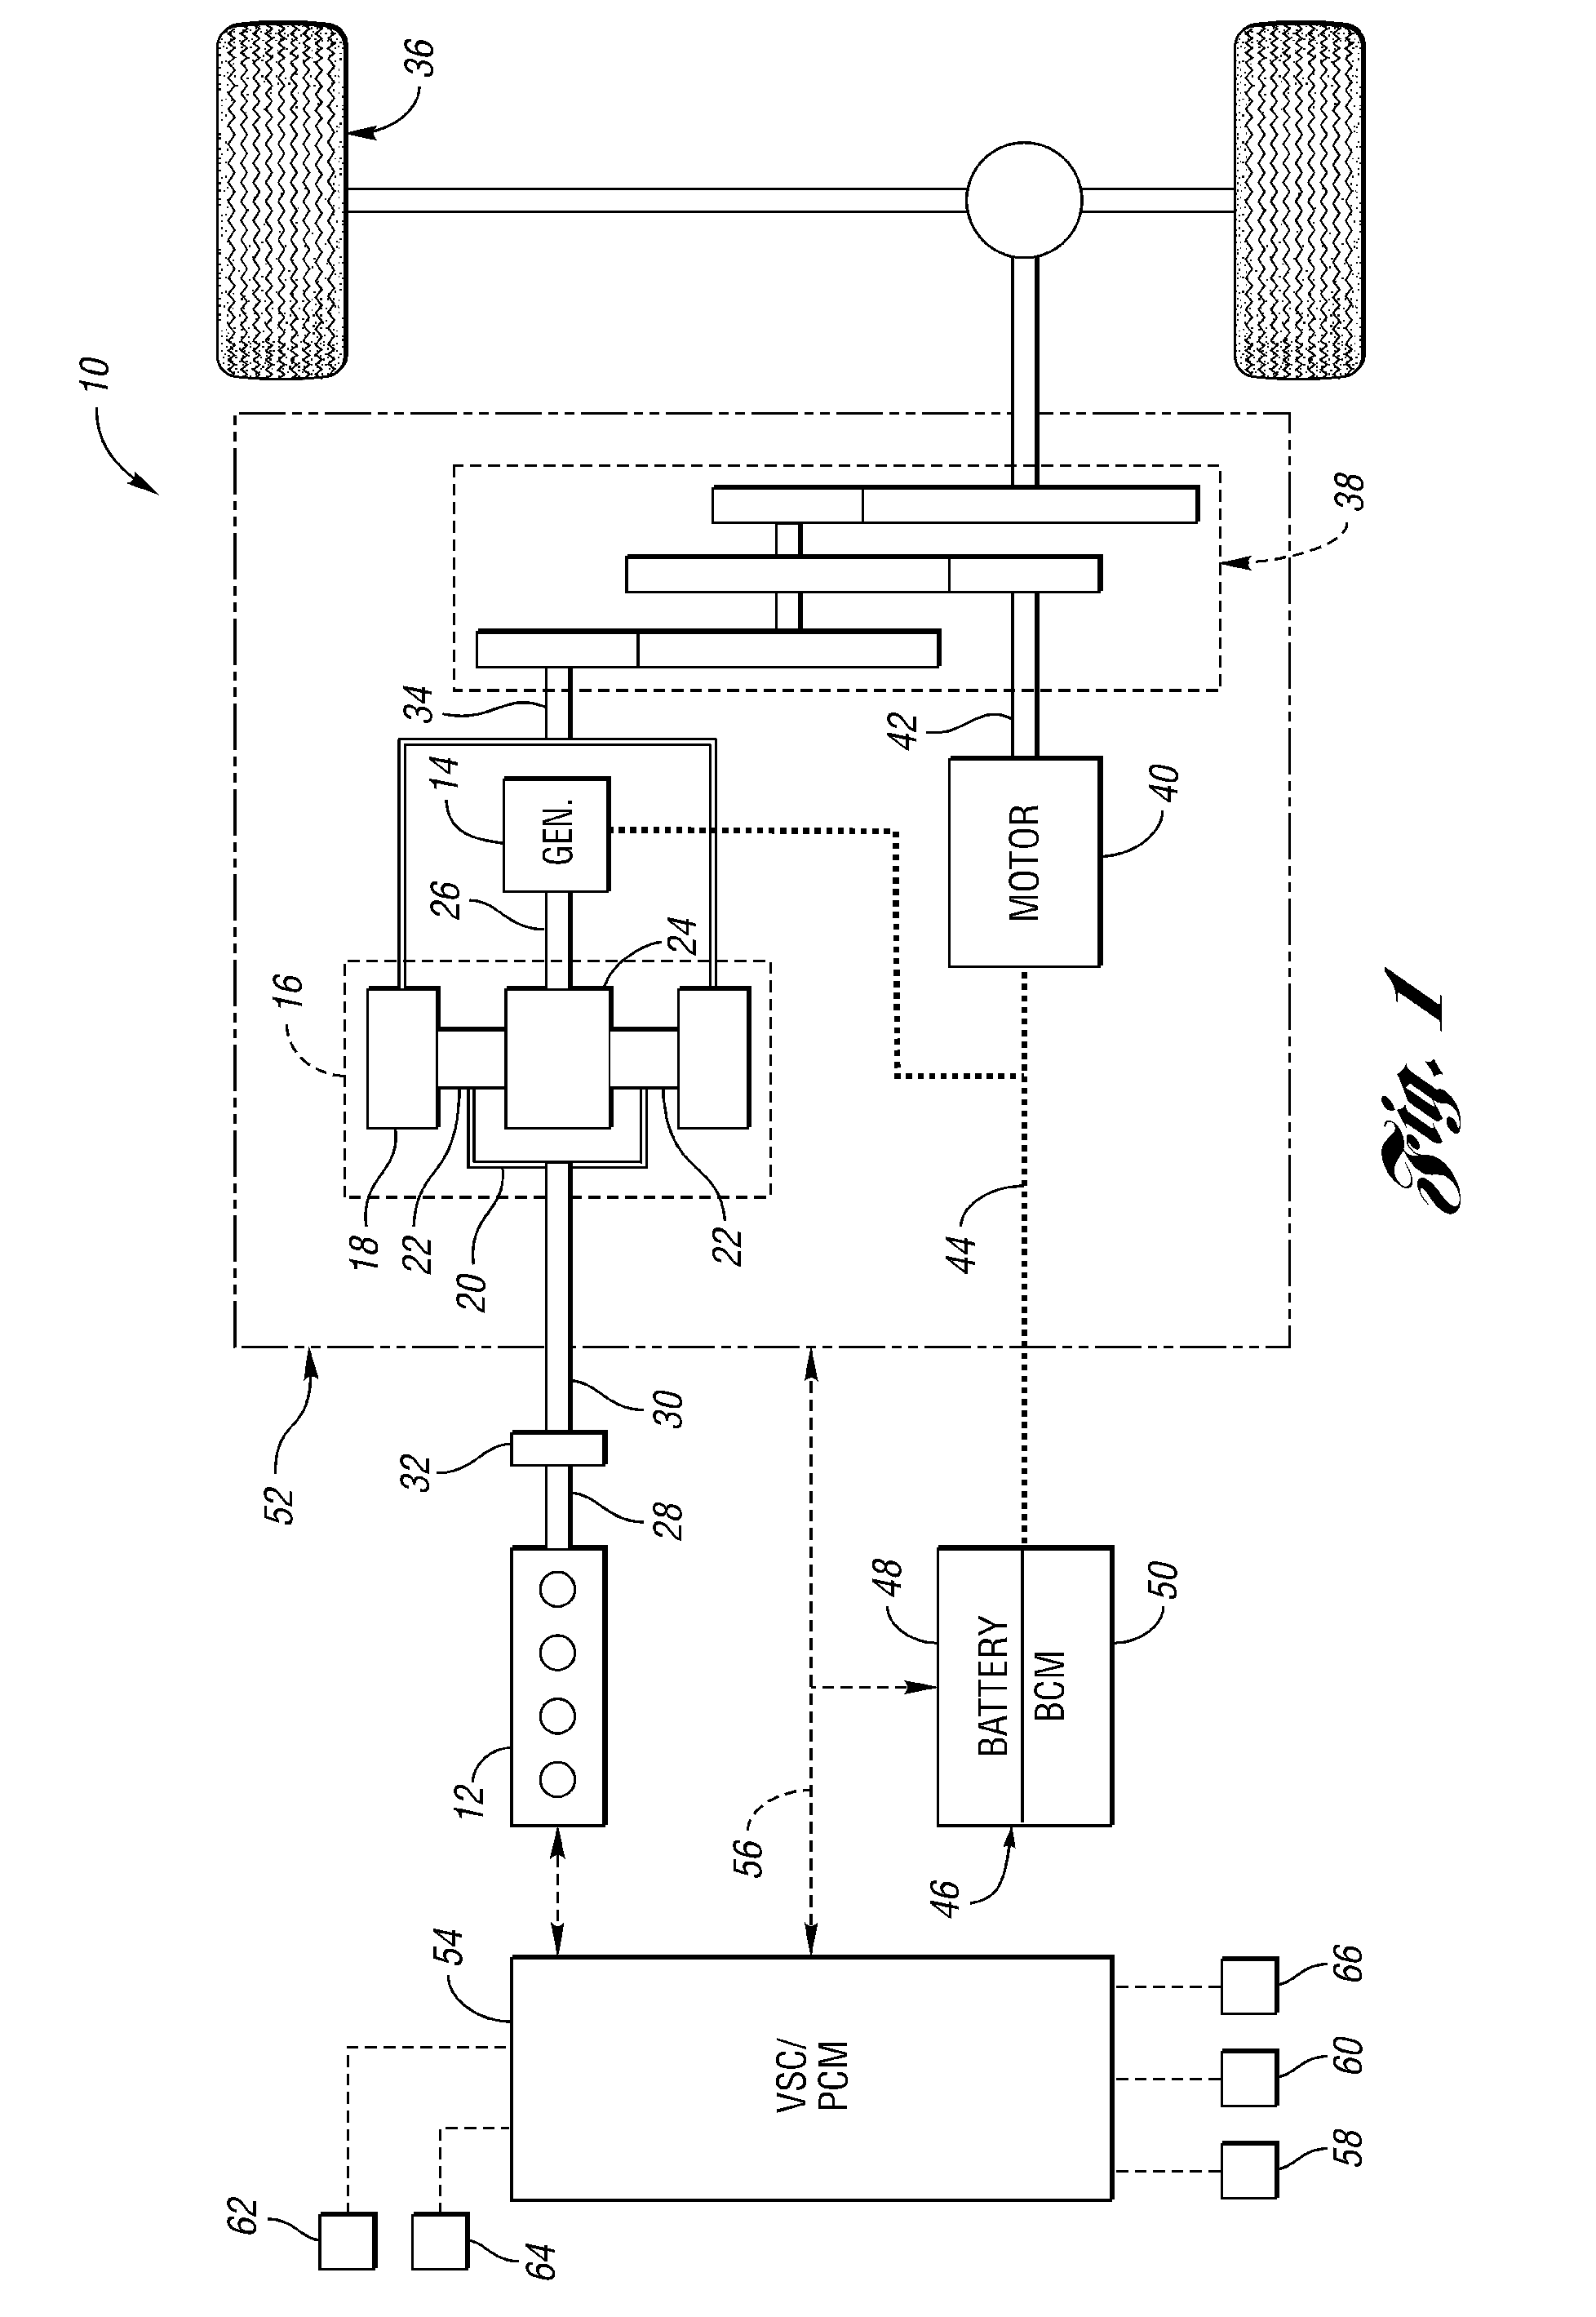 System and method for controlling a state of charge of an energy storage system